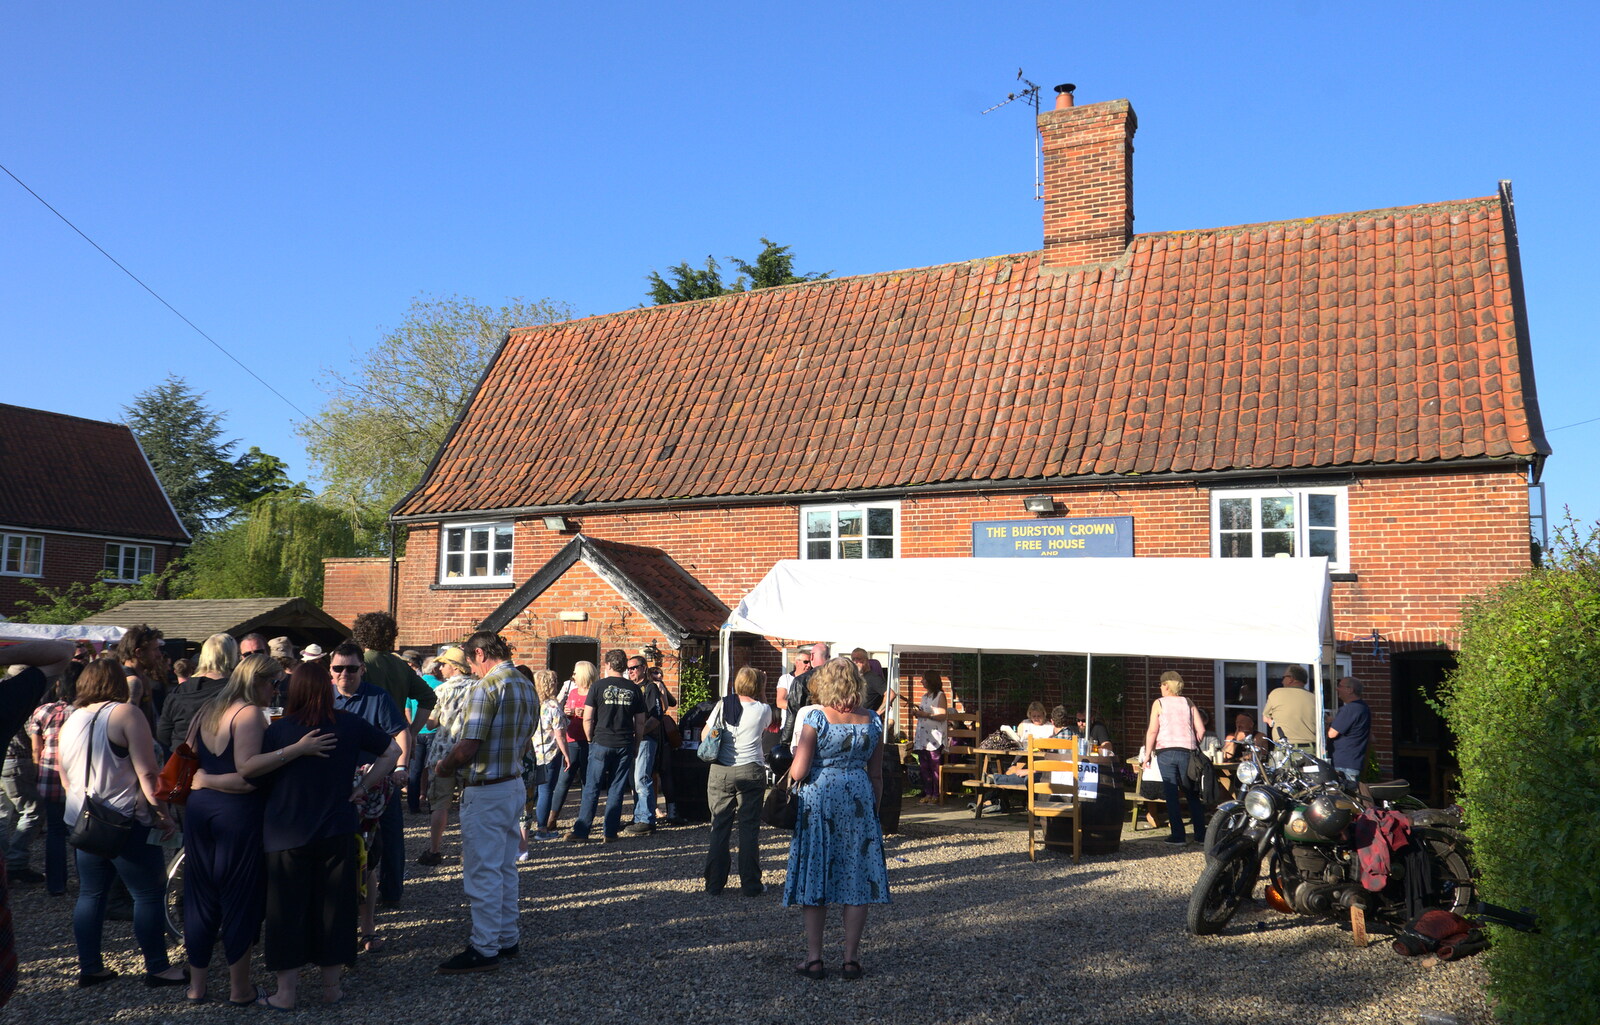 Crowds outside the Burston Crown from Beer, Bikes and Bands, Burston Crown, Burston, Norfolk - 6th May 2018